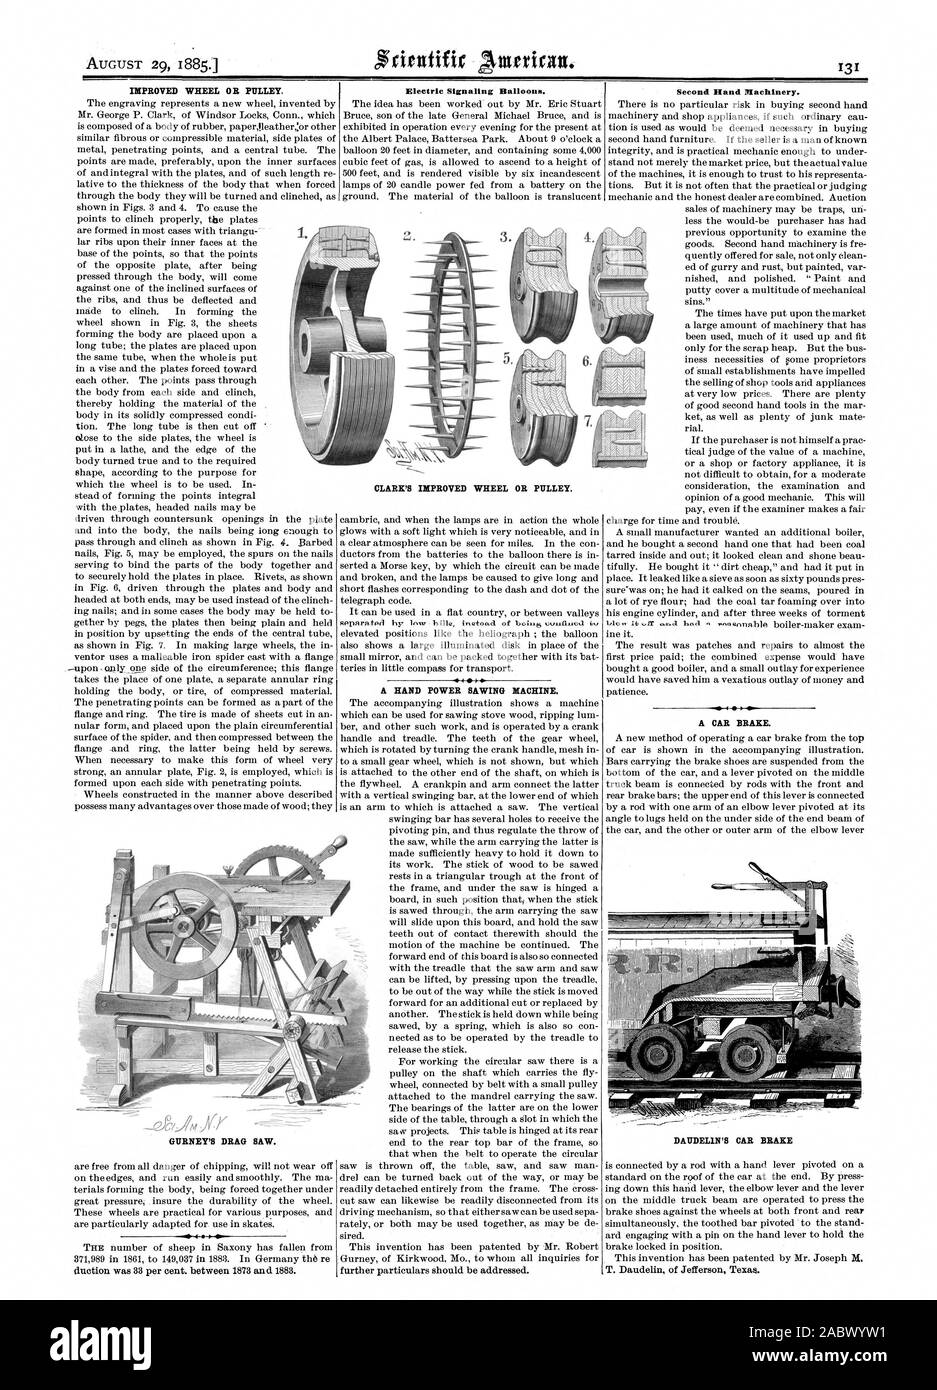 IMPROVED WHEEL OR PULLEY. Electric Signaling Balloons. A HAND POWER SAWING MACHINE. Second Hand Machinery. A CAR BRAKE. DAUDELIN'S CAR BRAKE 1 t GURNEY'S DRAG SAW. CLARK'S IMPROVED WHEEL OR PULLEY., scientific american, 1885-08-29 Stock Photo